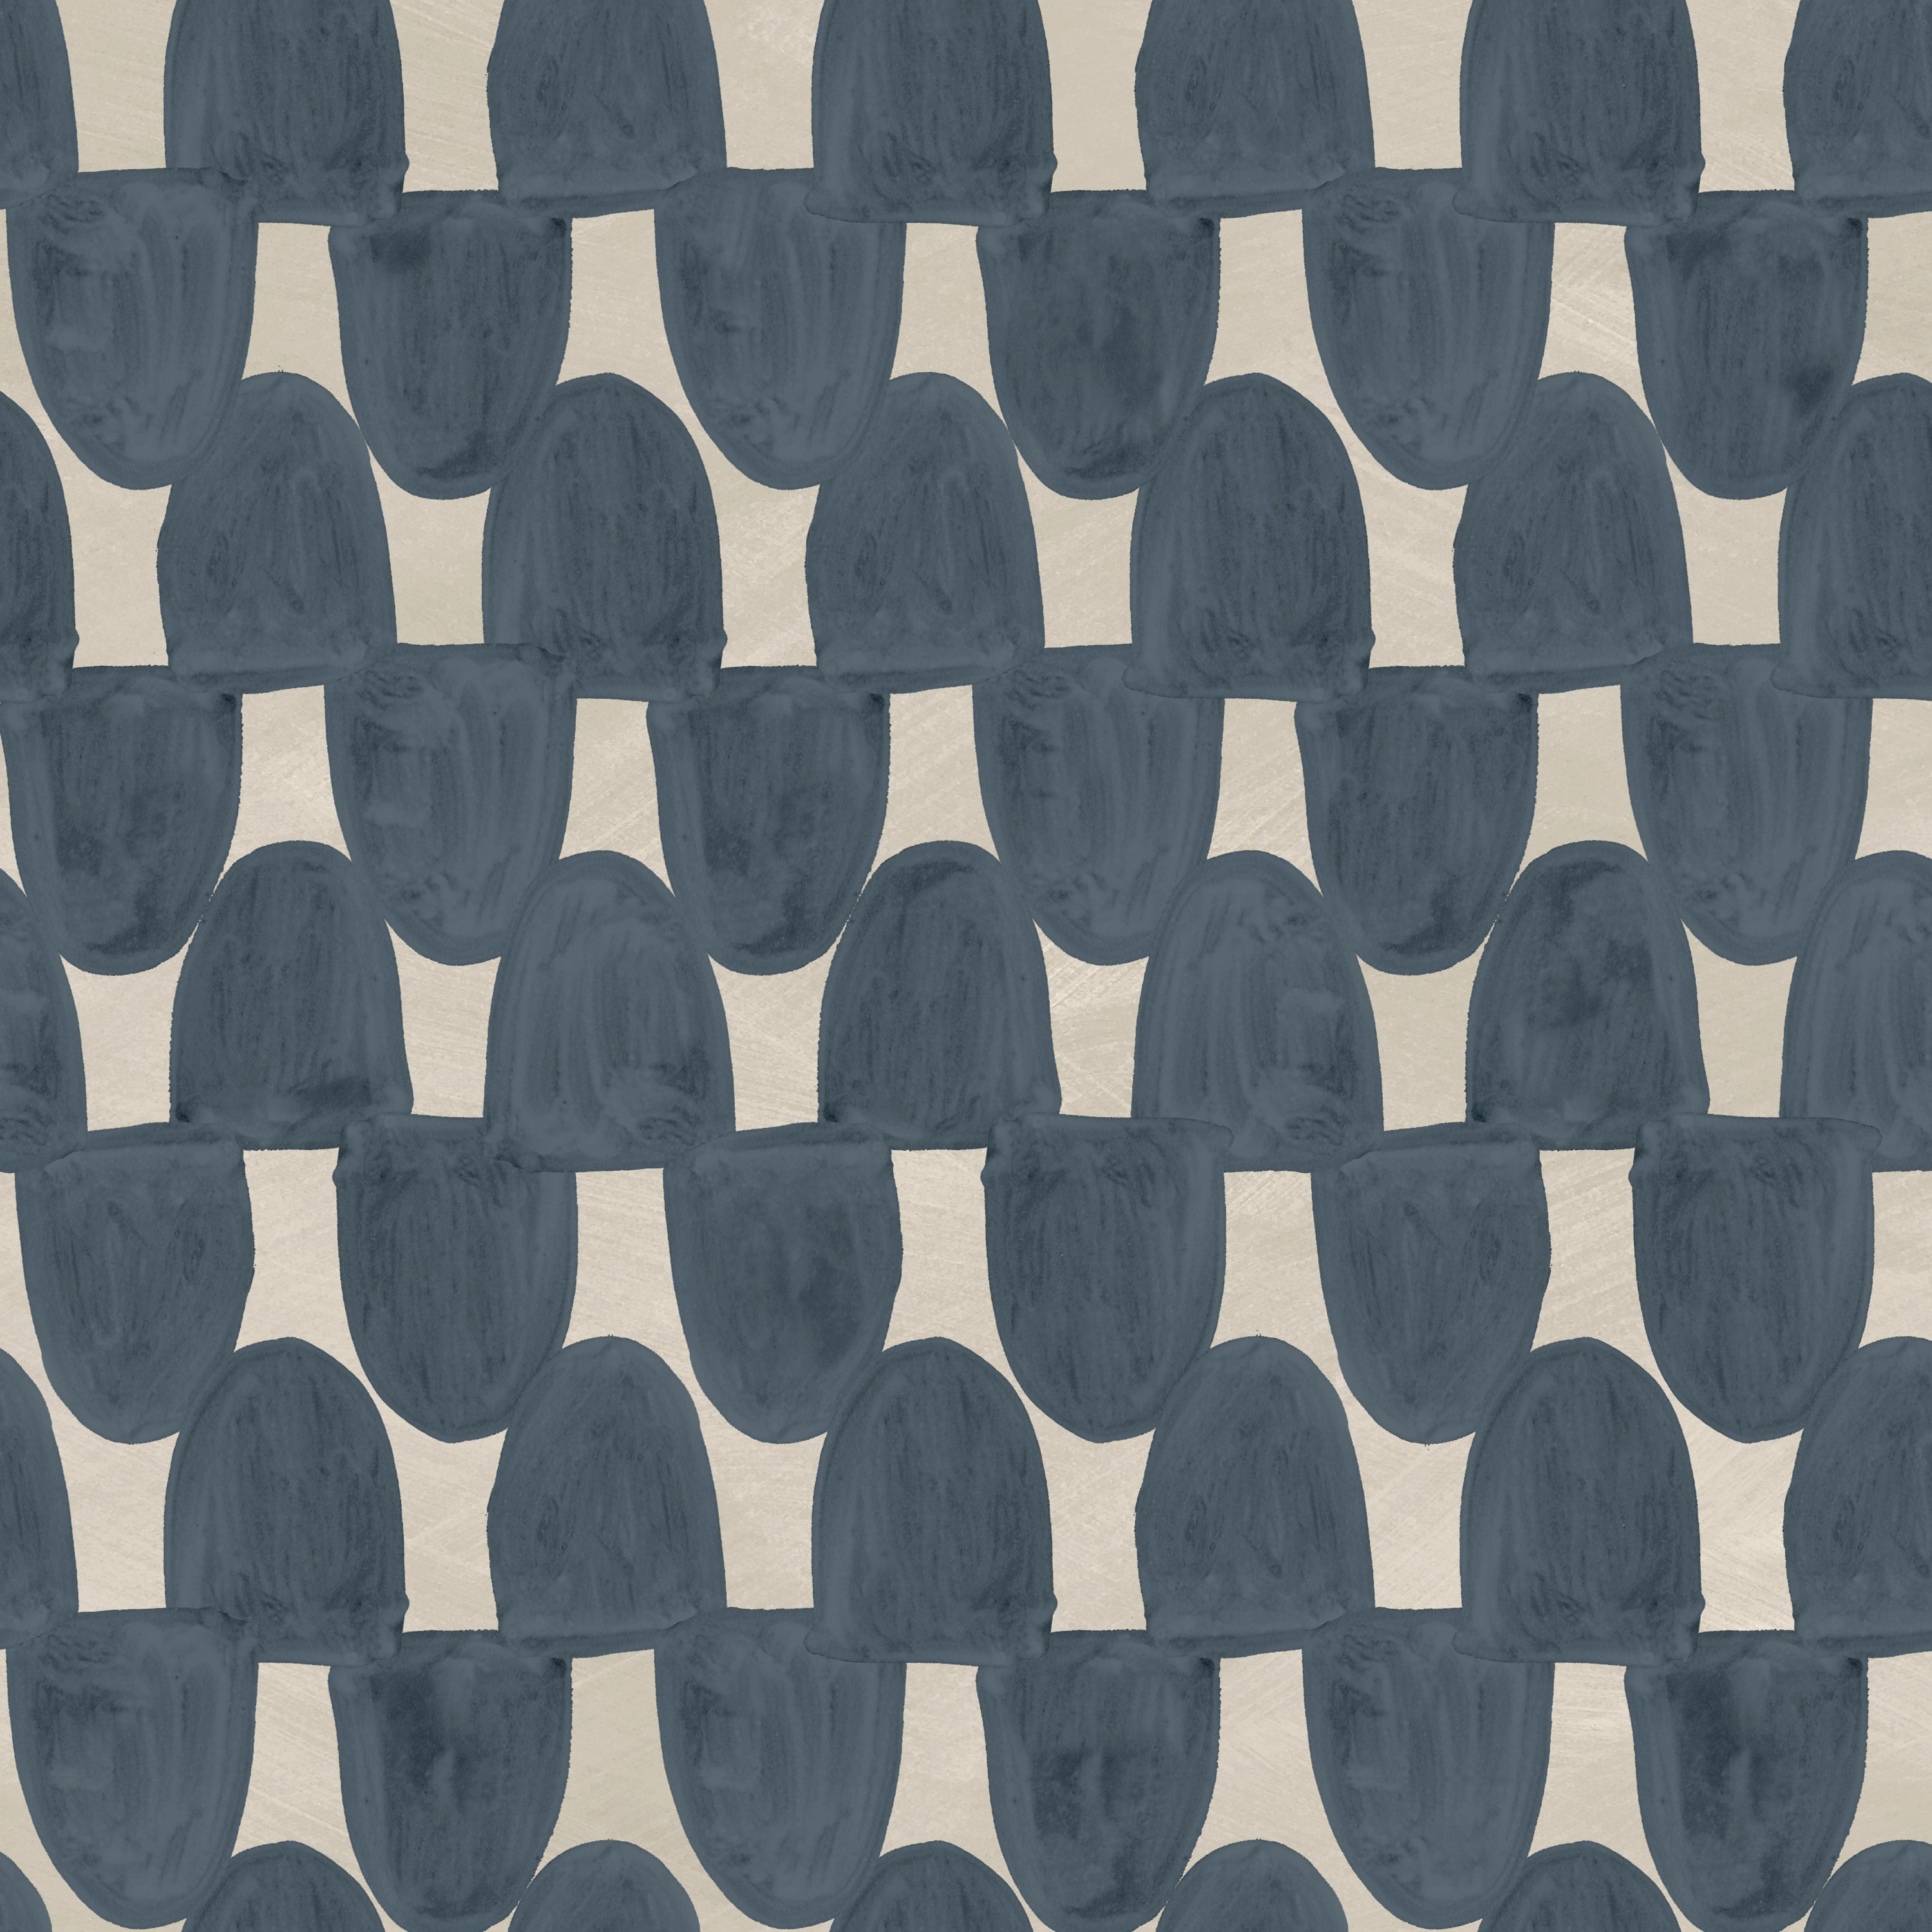 Detail of fabric in an abstract scalloped print in navy on a tan field.